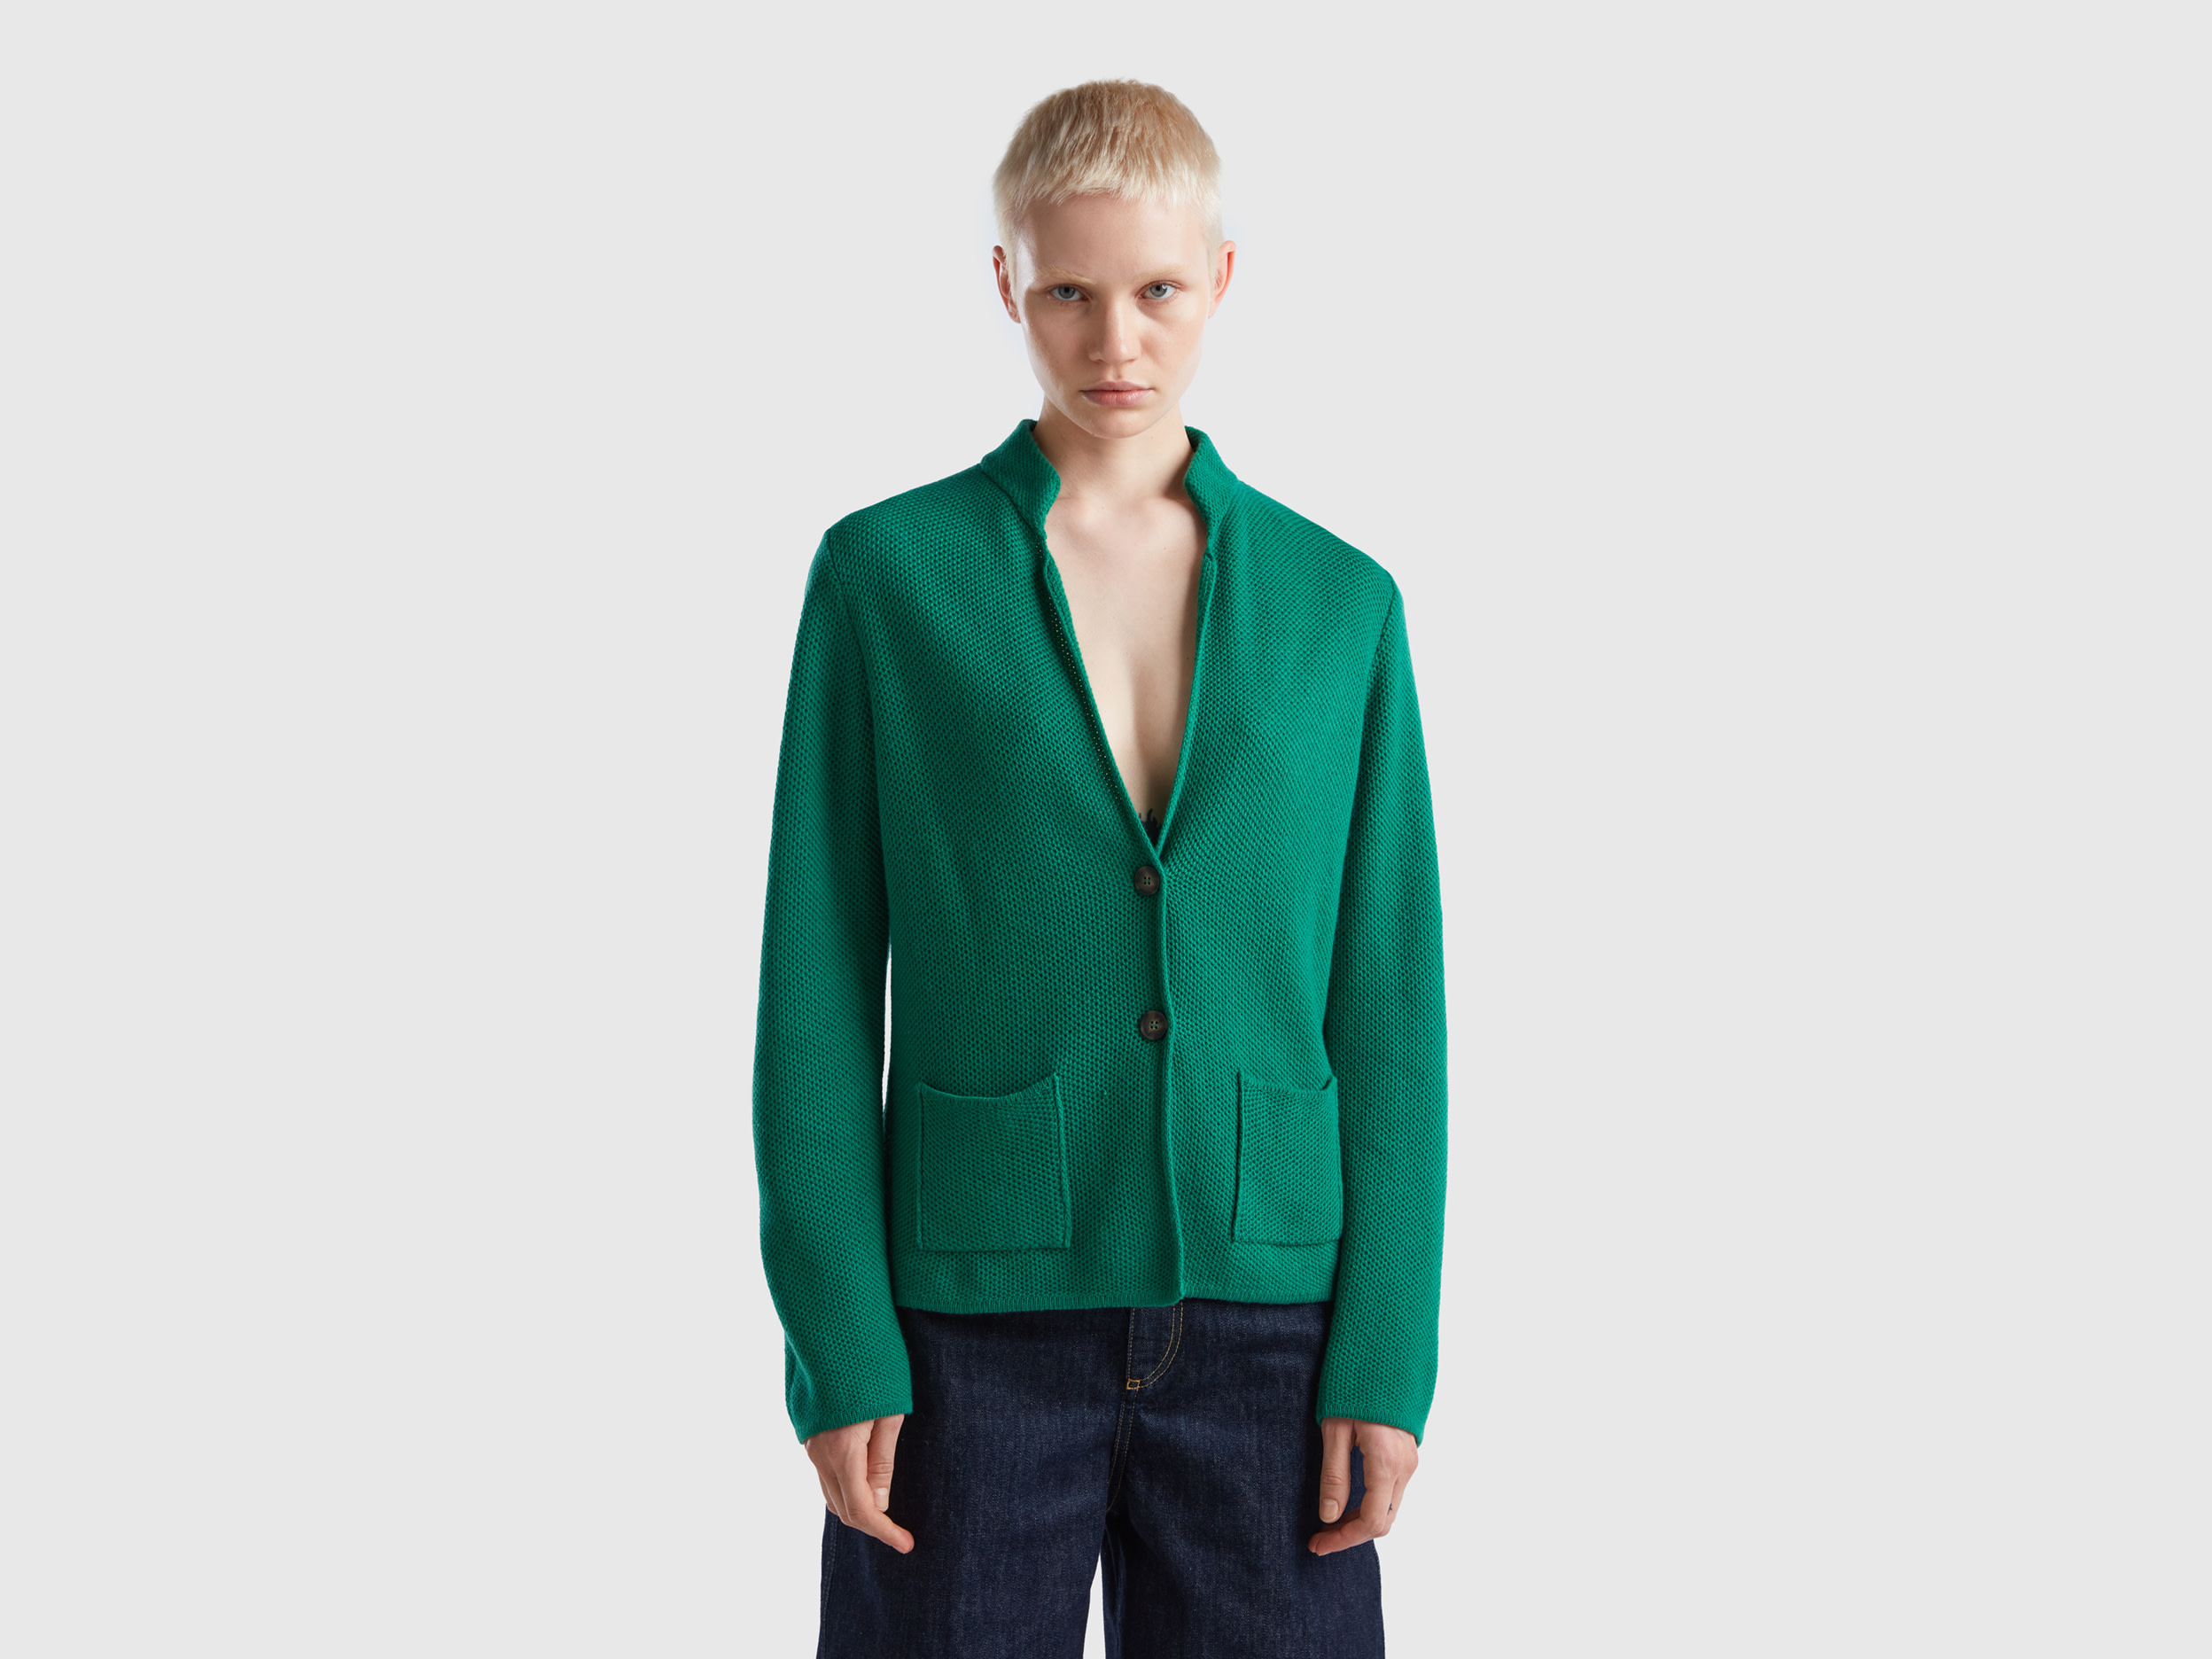 Benetton, Knit Jacket In Wool And Cashmere Blend, size XL, Green, Women